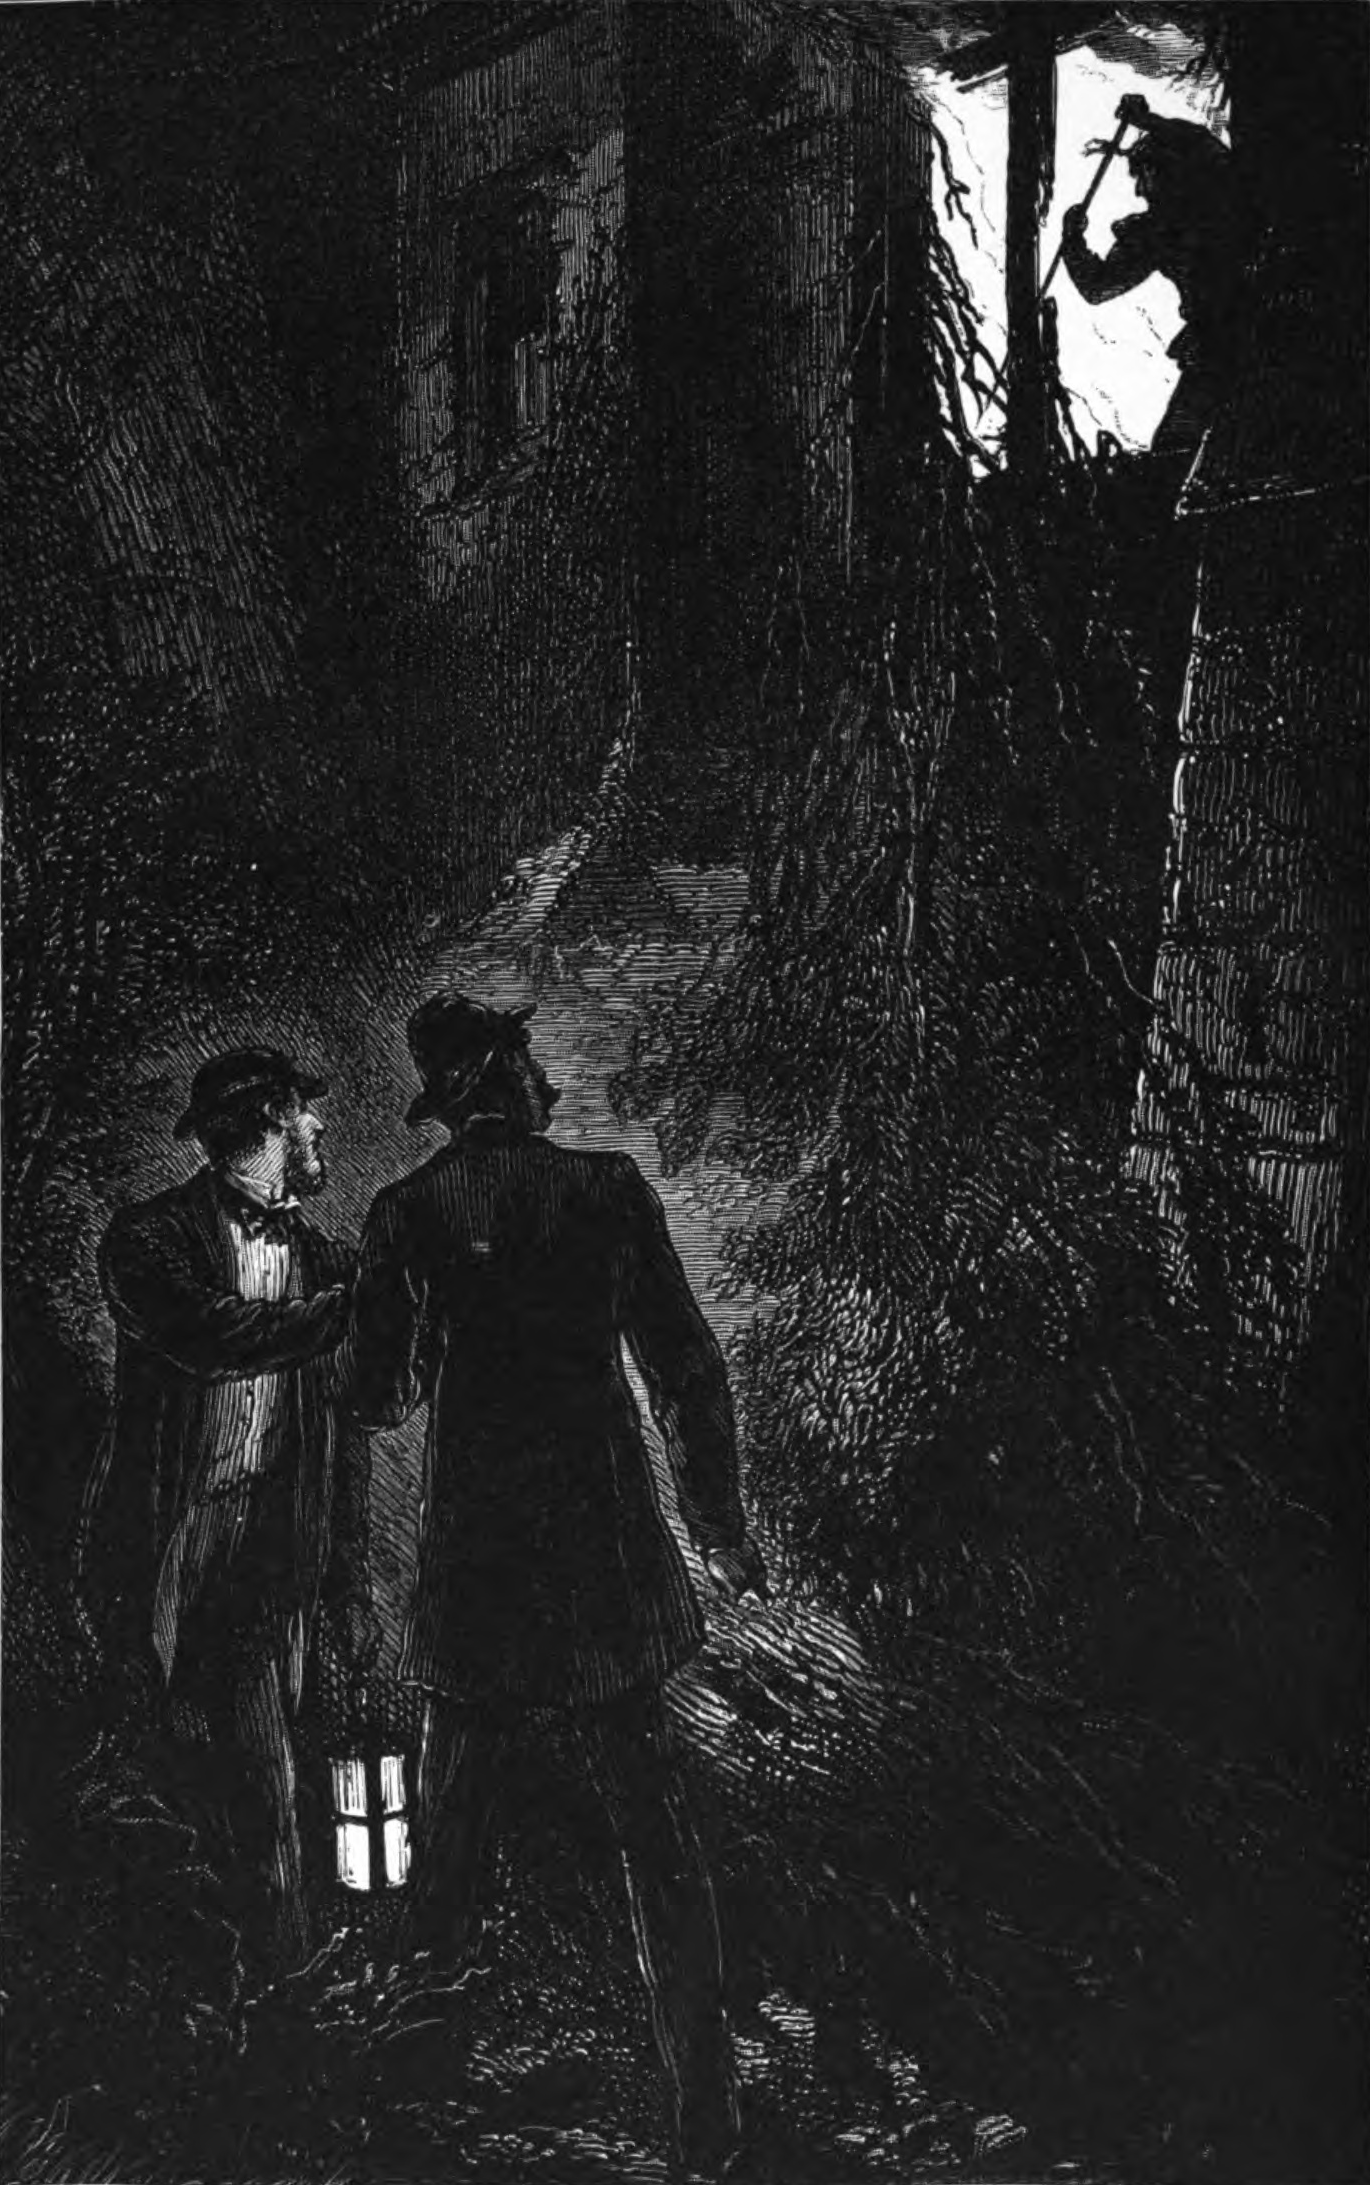 Image Description: Harry and Charlie stand outside a house at nighttime. Charlie carries a lantern. Through the window, the two men see the silhouette of someone inside against the flames within the house. End Description.